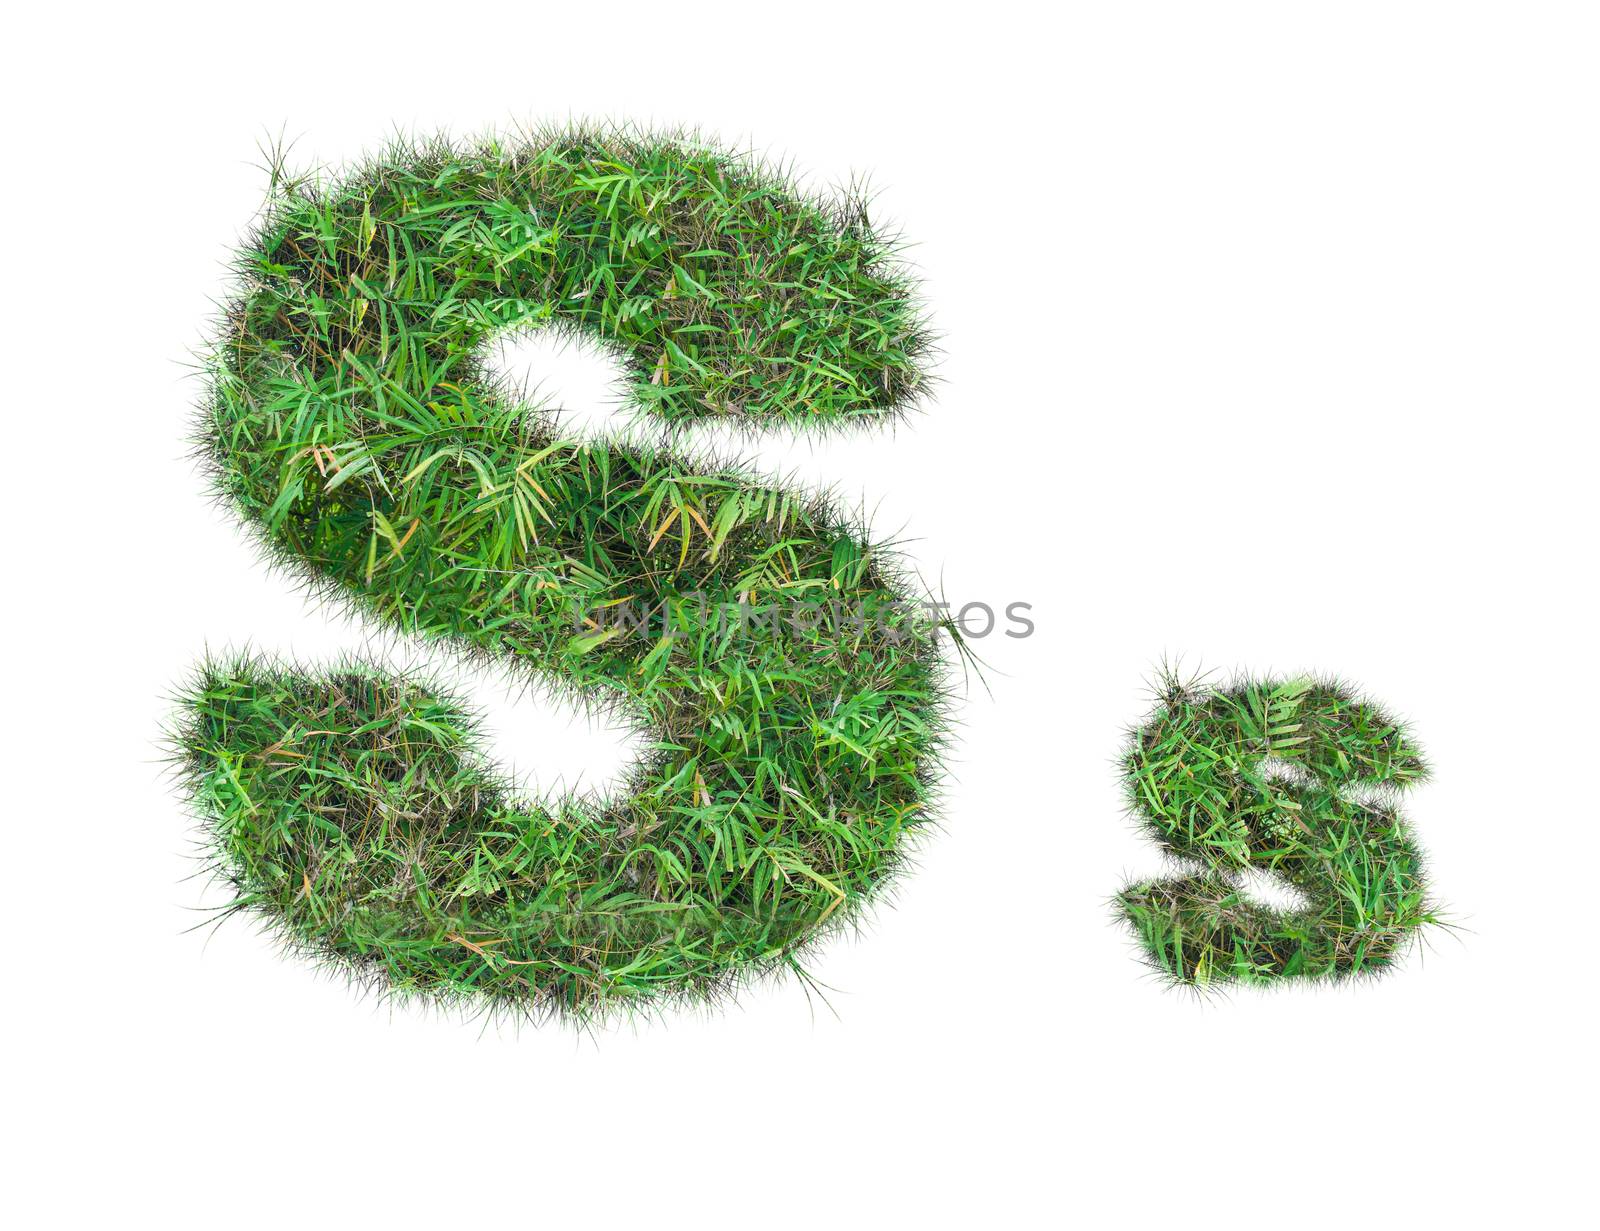 letter S on green grass isolated by Sorapop